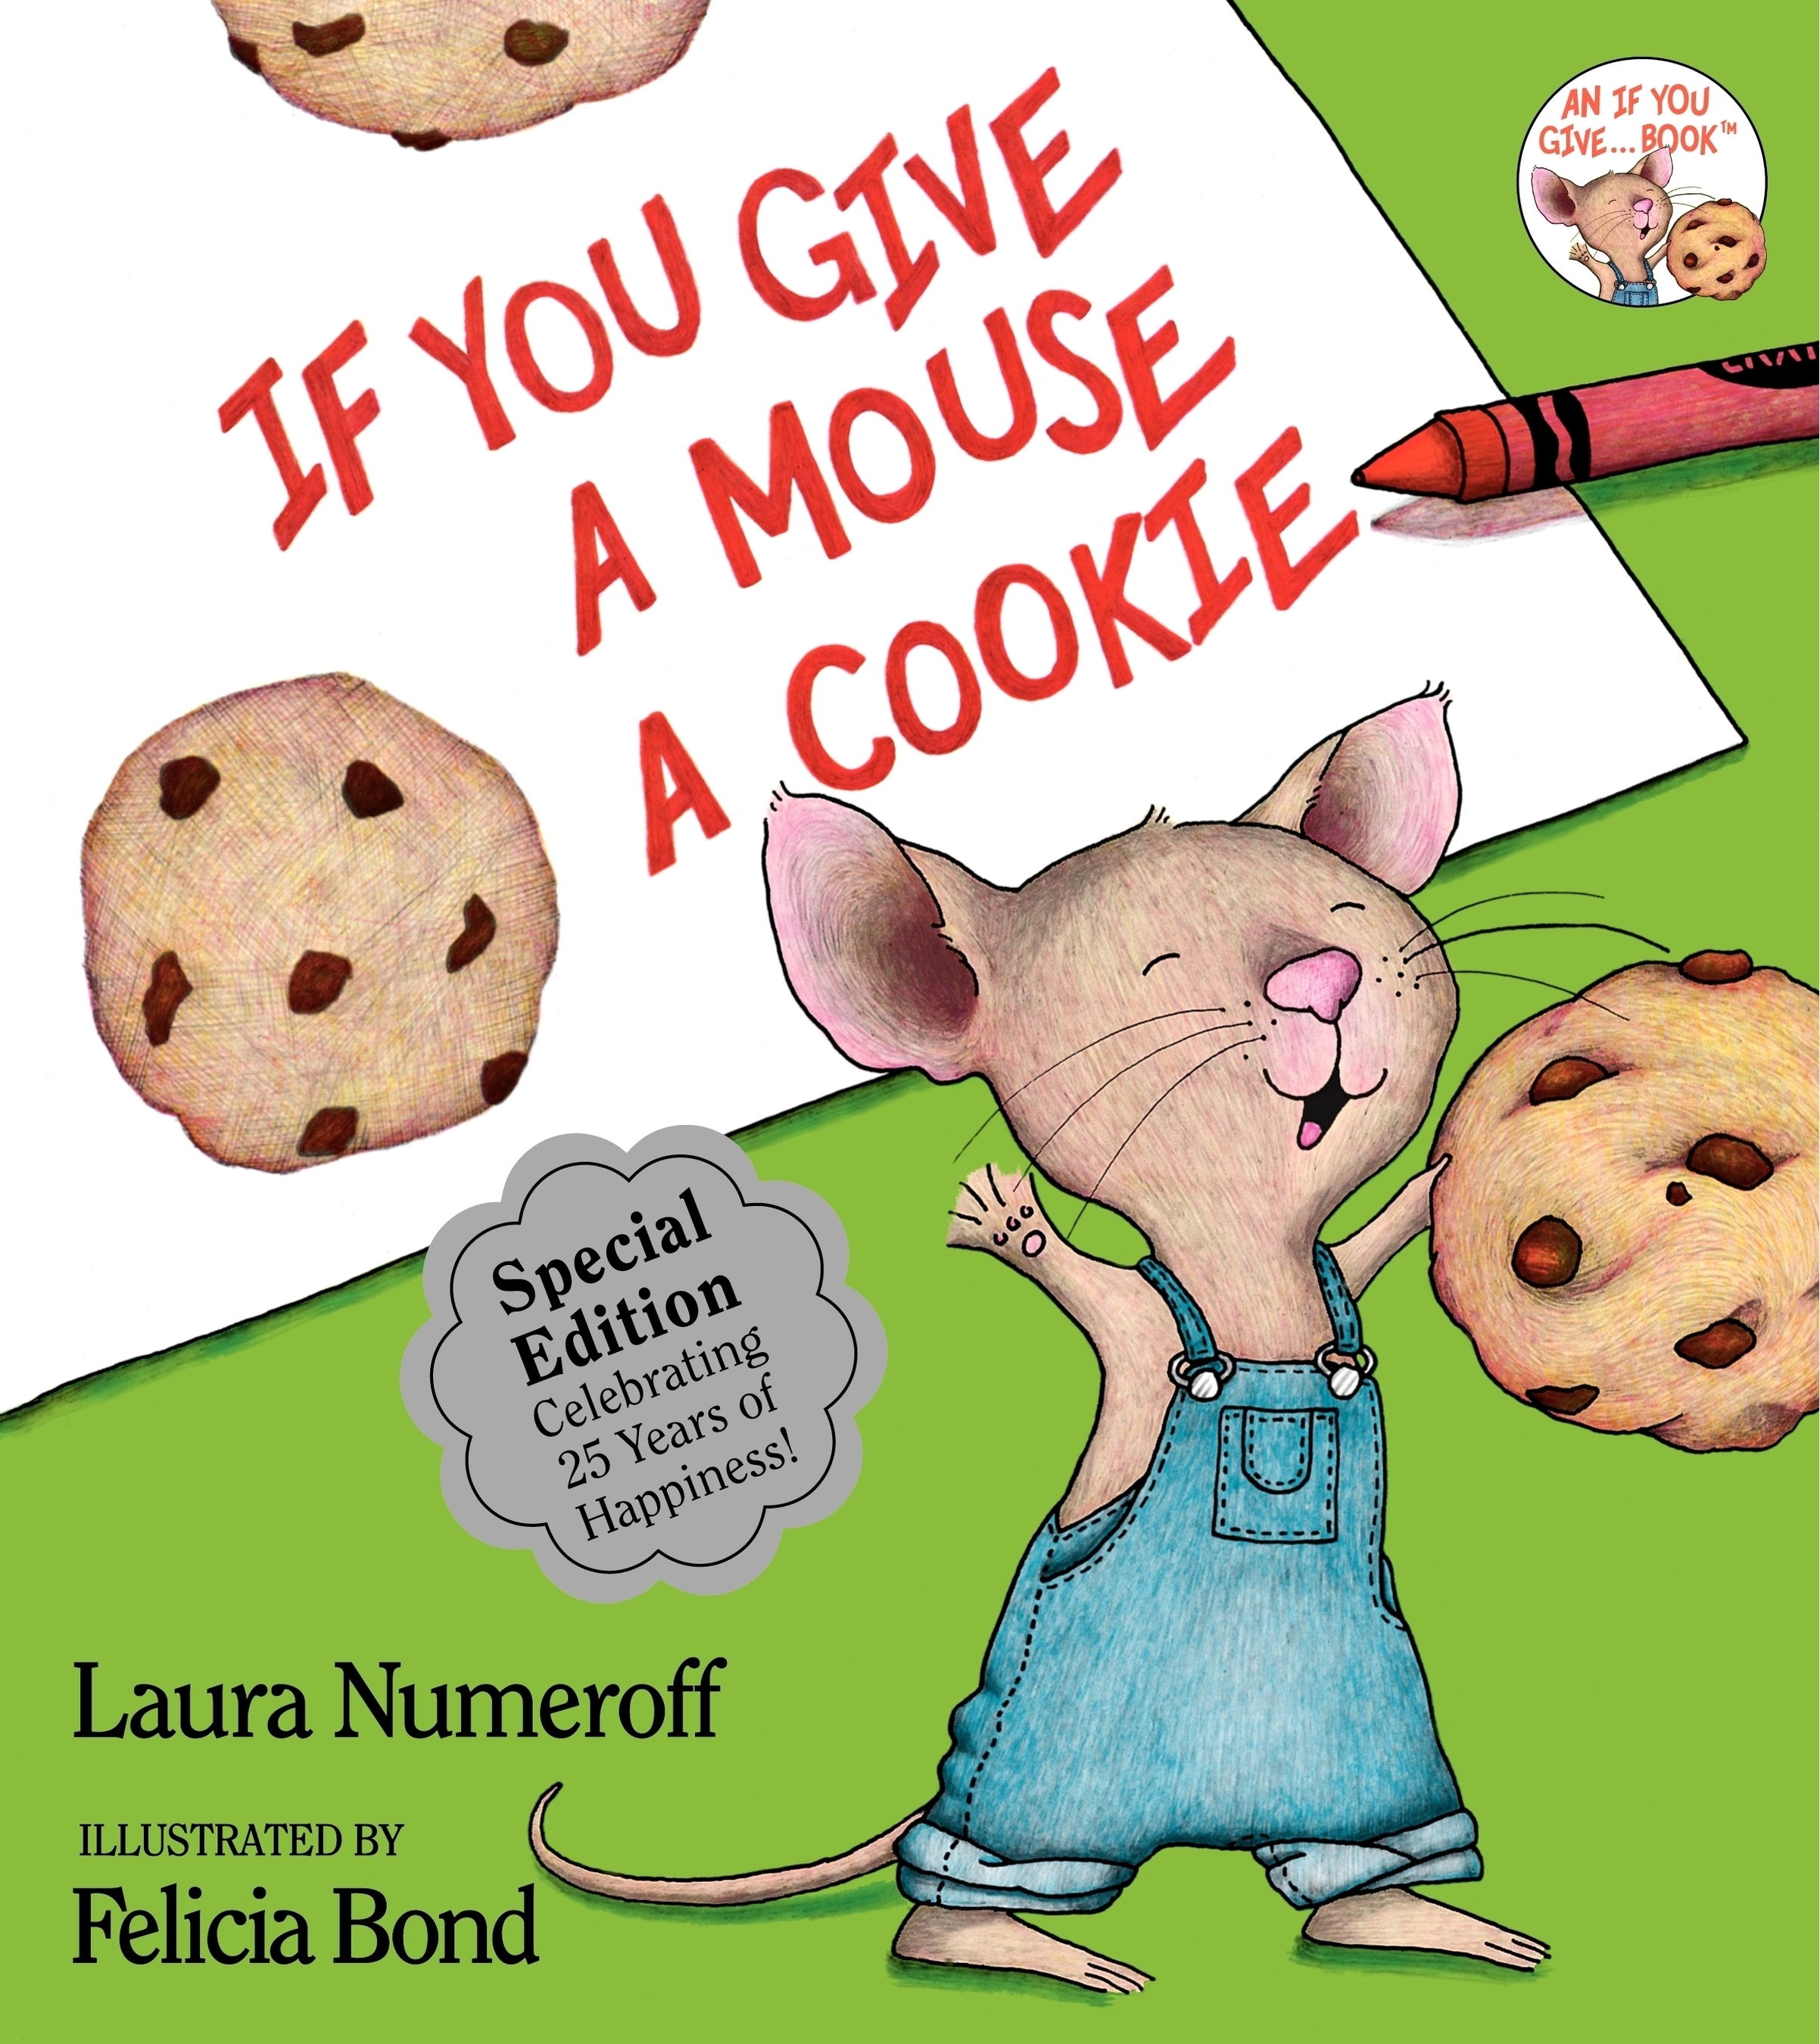 Three different full-size, hardcover picture books will be offered in Sun-Maid's Snack 'n' Read book offer and sweepstakes, beginning with "If You Give A Mouse A Cookie." A new book title, published by Harper-Collins, will be available every four weeks.  (PRNewsFoto/Sun-Maid )